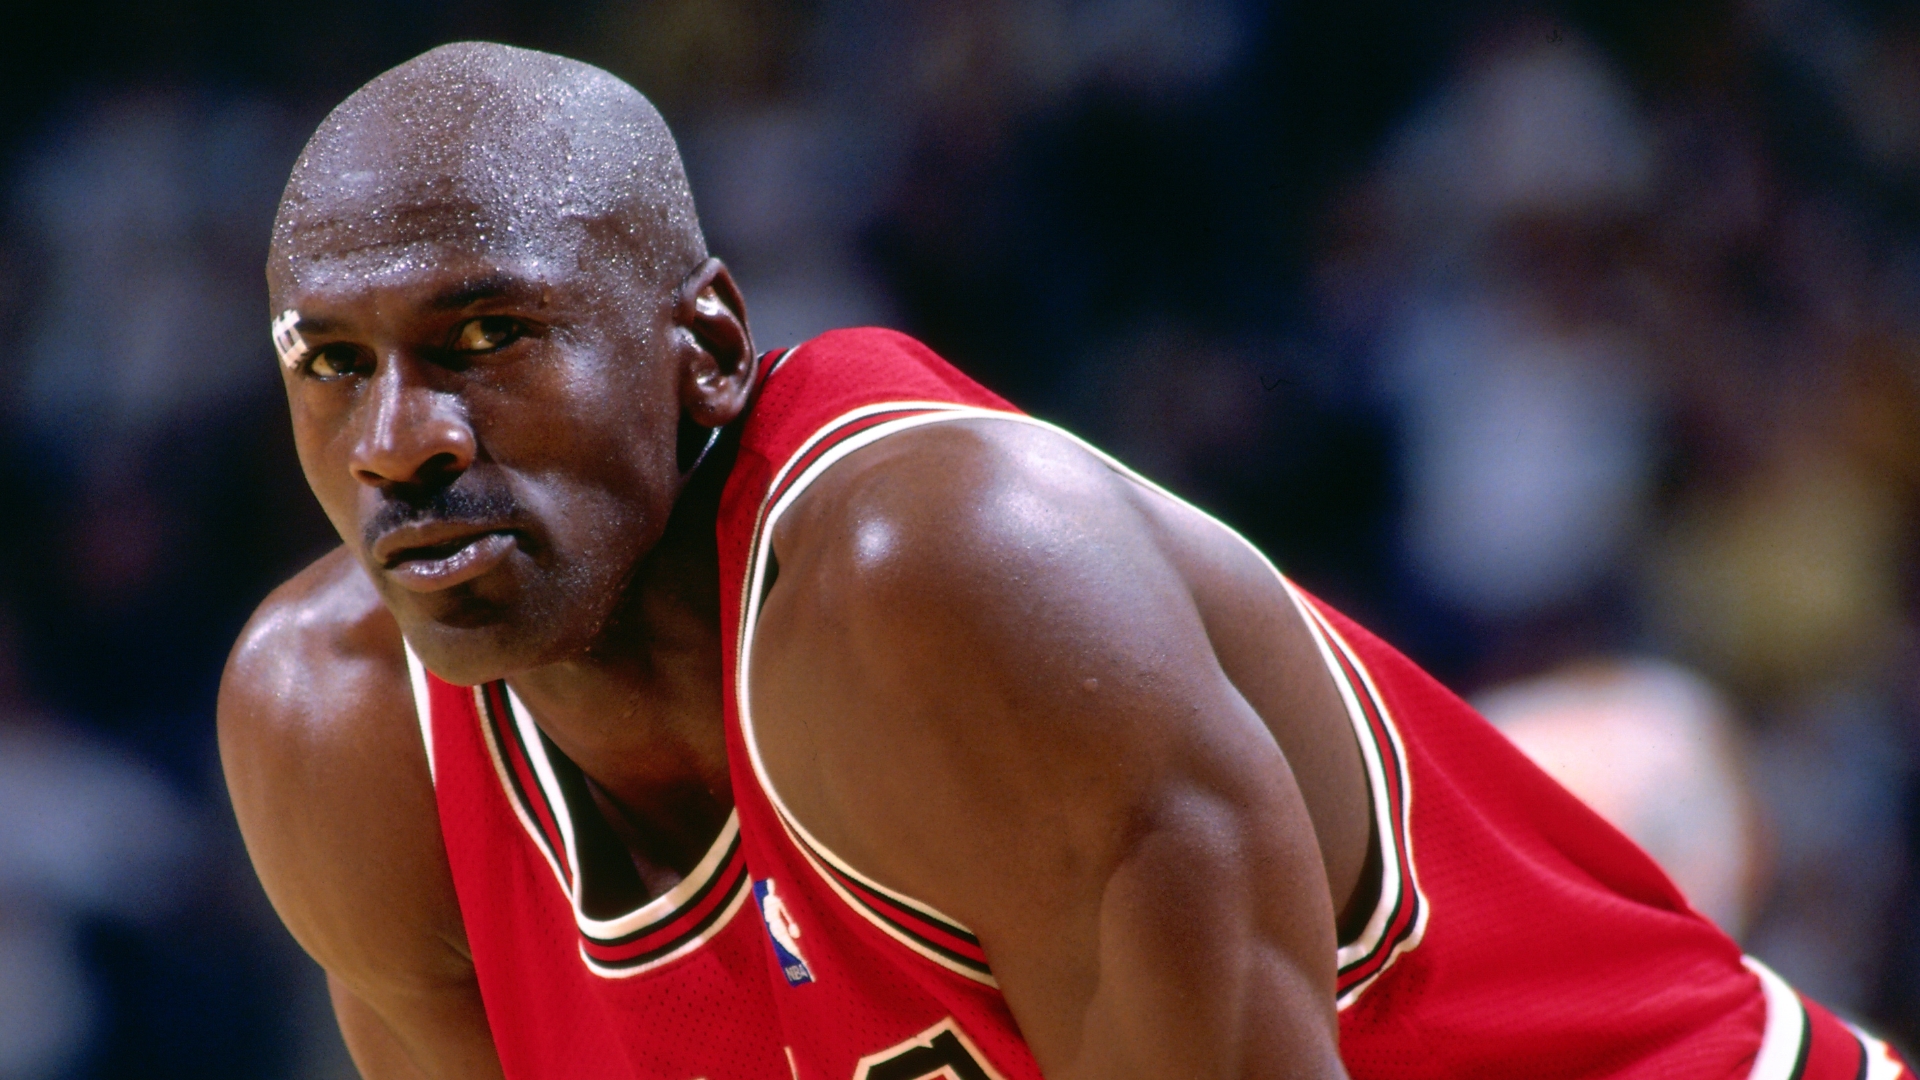 How significant was MJ's impact off the court?